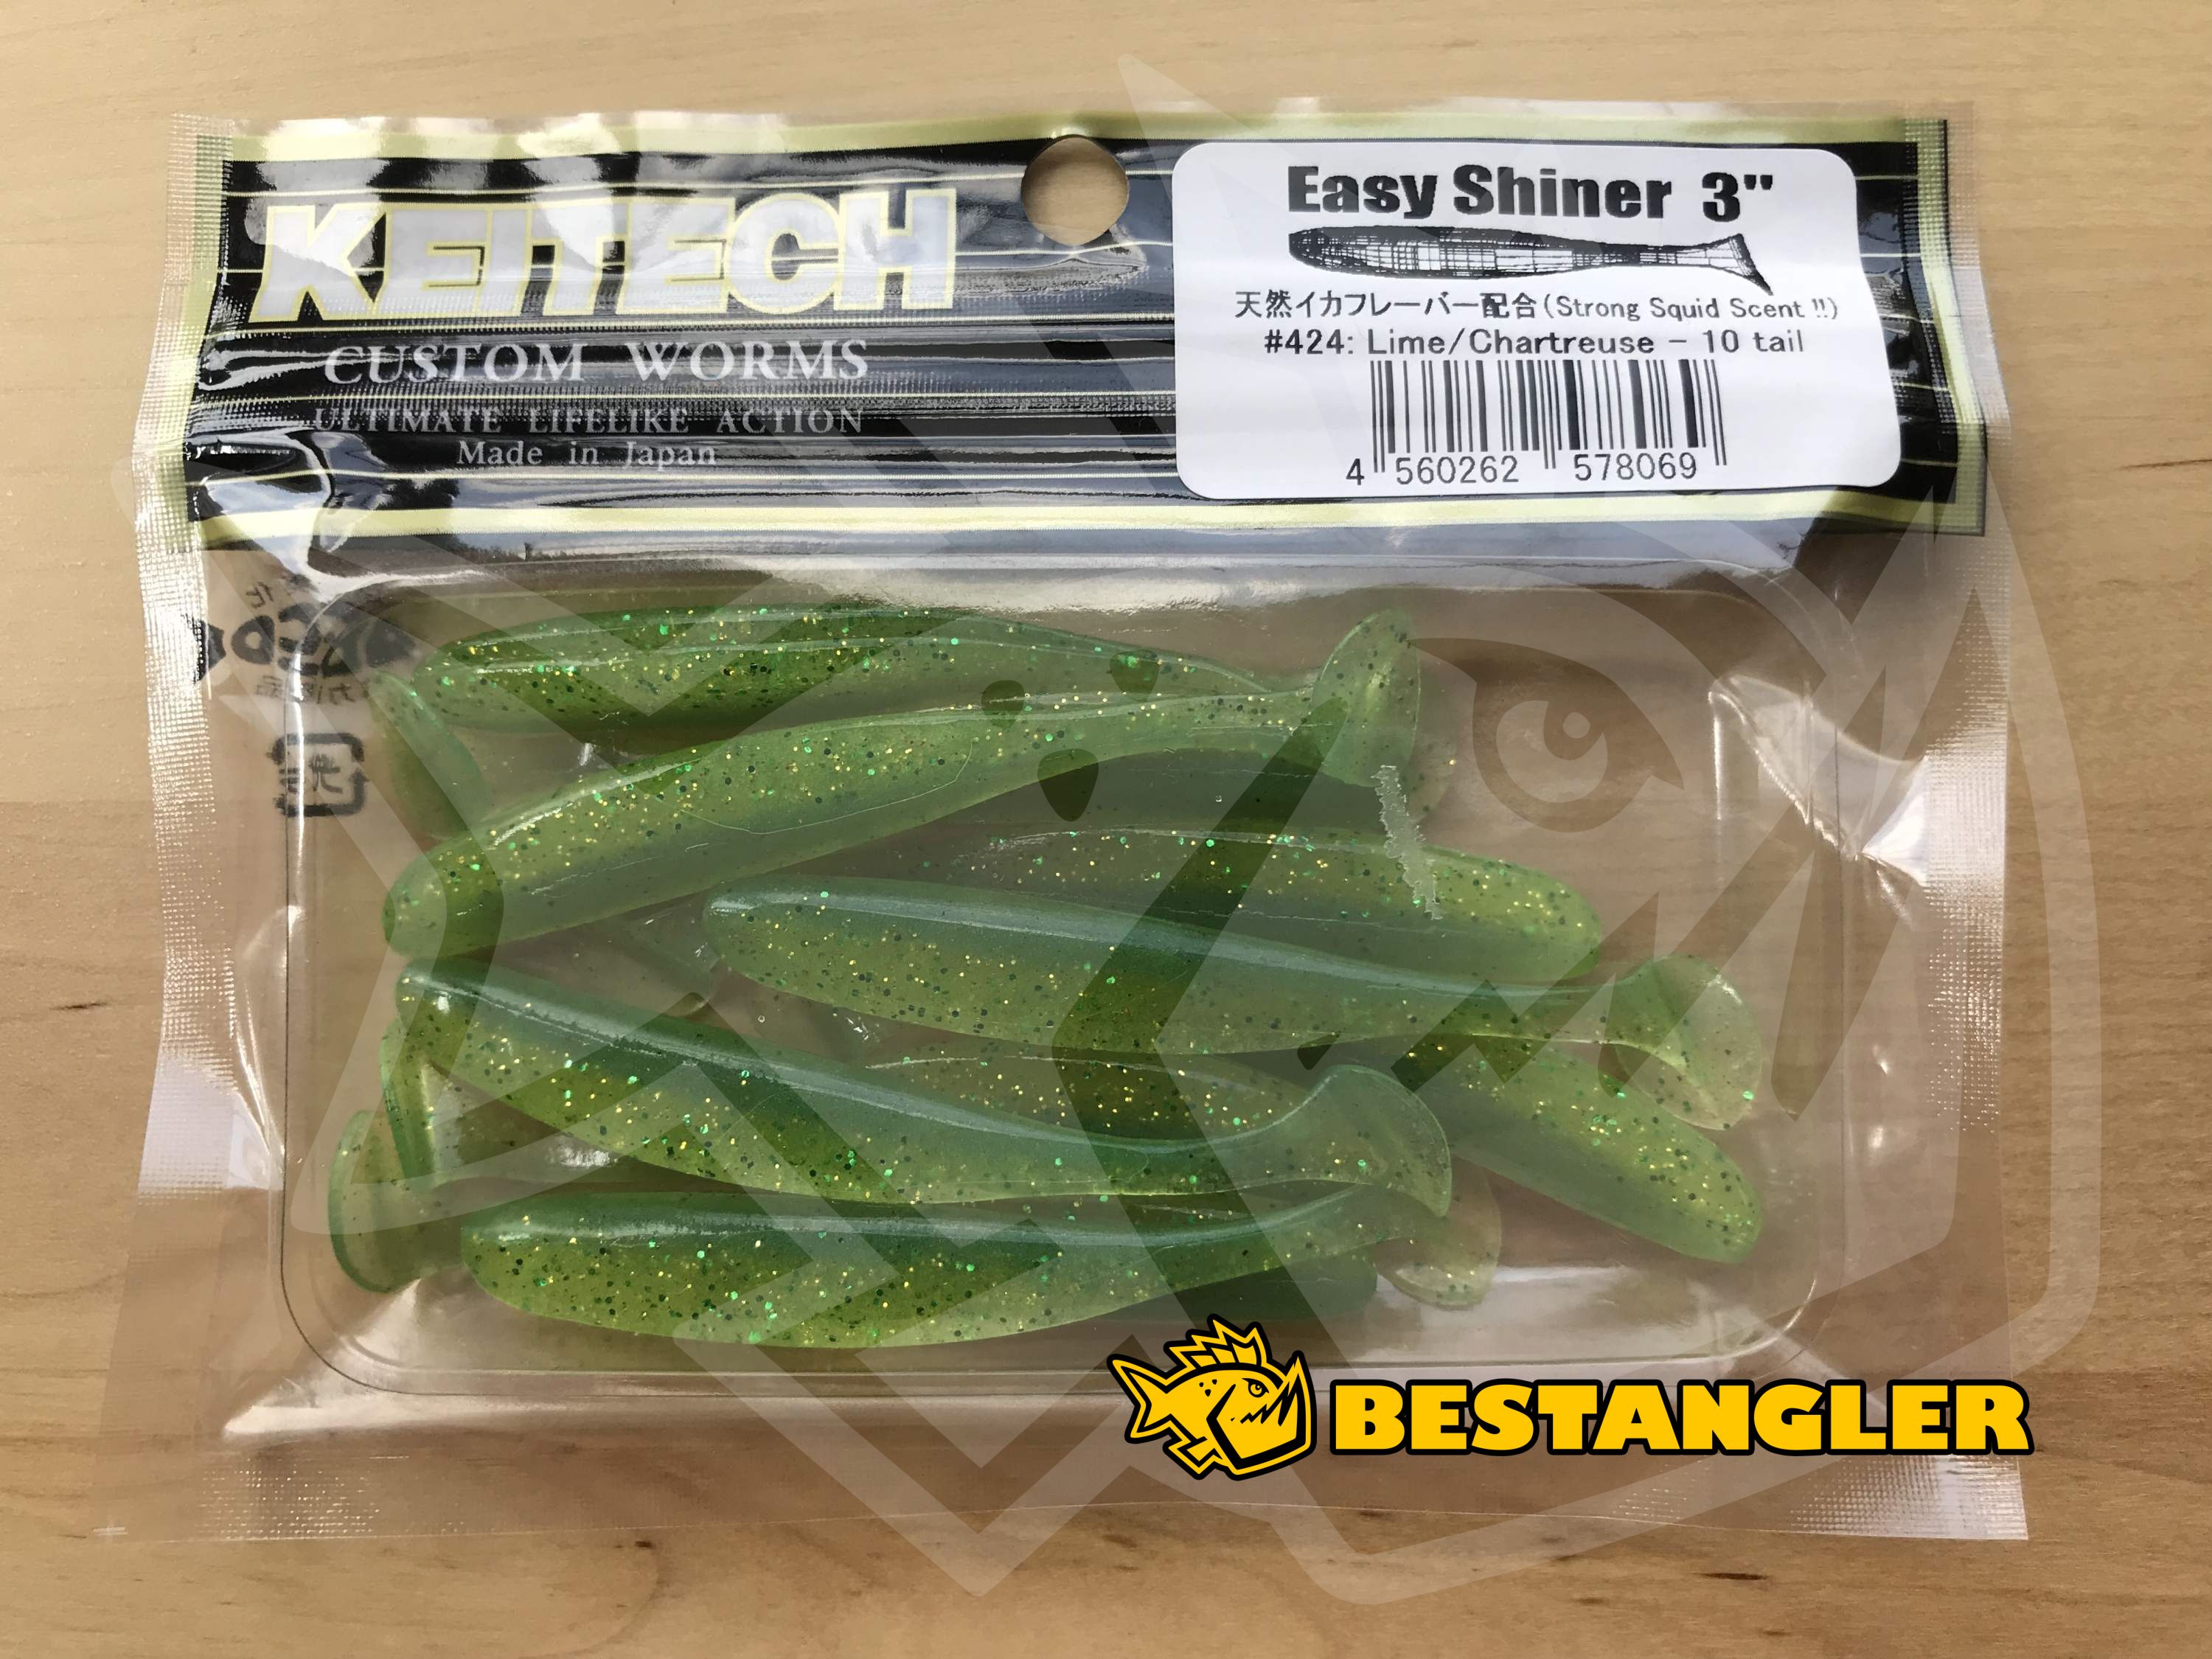 Keitech Easy Shiner 3 Lime / Chartreuse